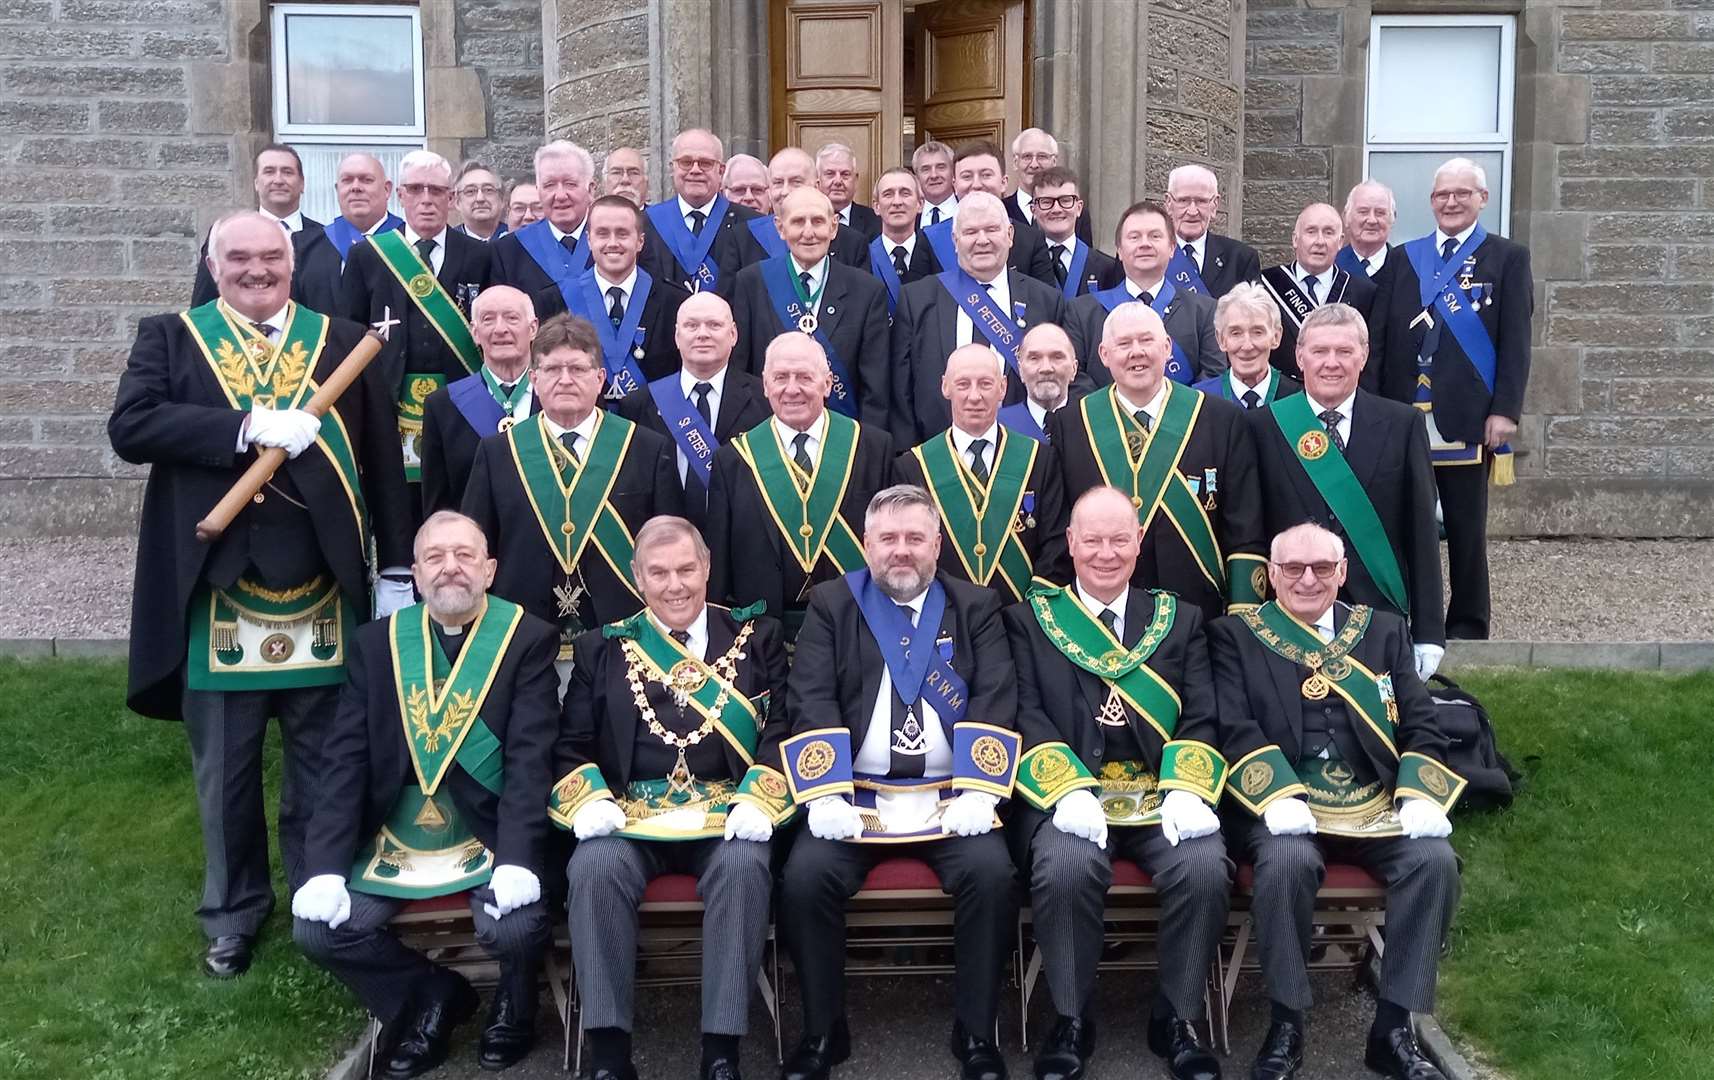 From left (front): Rev Adrian Bunnell, Ramsay McGhee, Grand Master Mason of Scotland, William Durrand, Right Worshipful Master of St Peter’s Operative No 284, Jim Beattie, Provincial Grand Master of Caithness, and William MacLeod, immediate past Provincial Grand Master of Caithness, with lodge members looking on. Picture: Willie Mackay